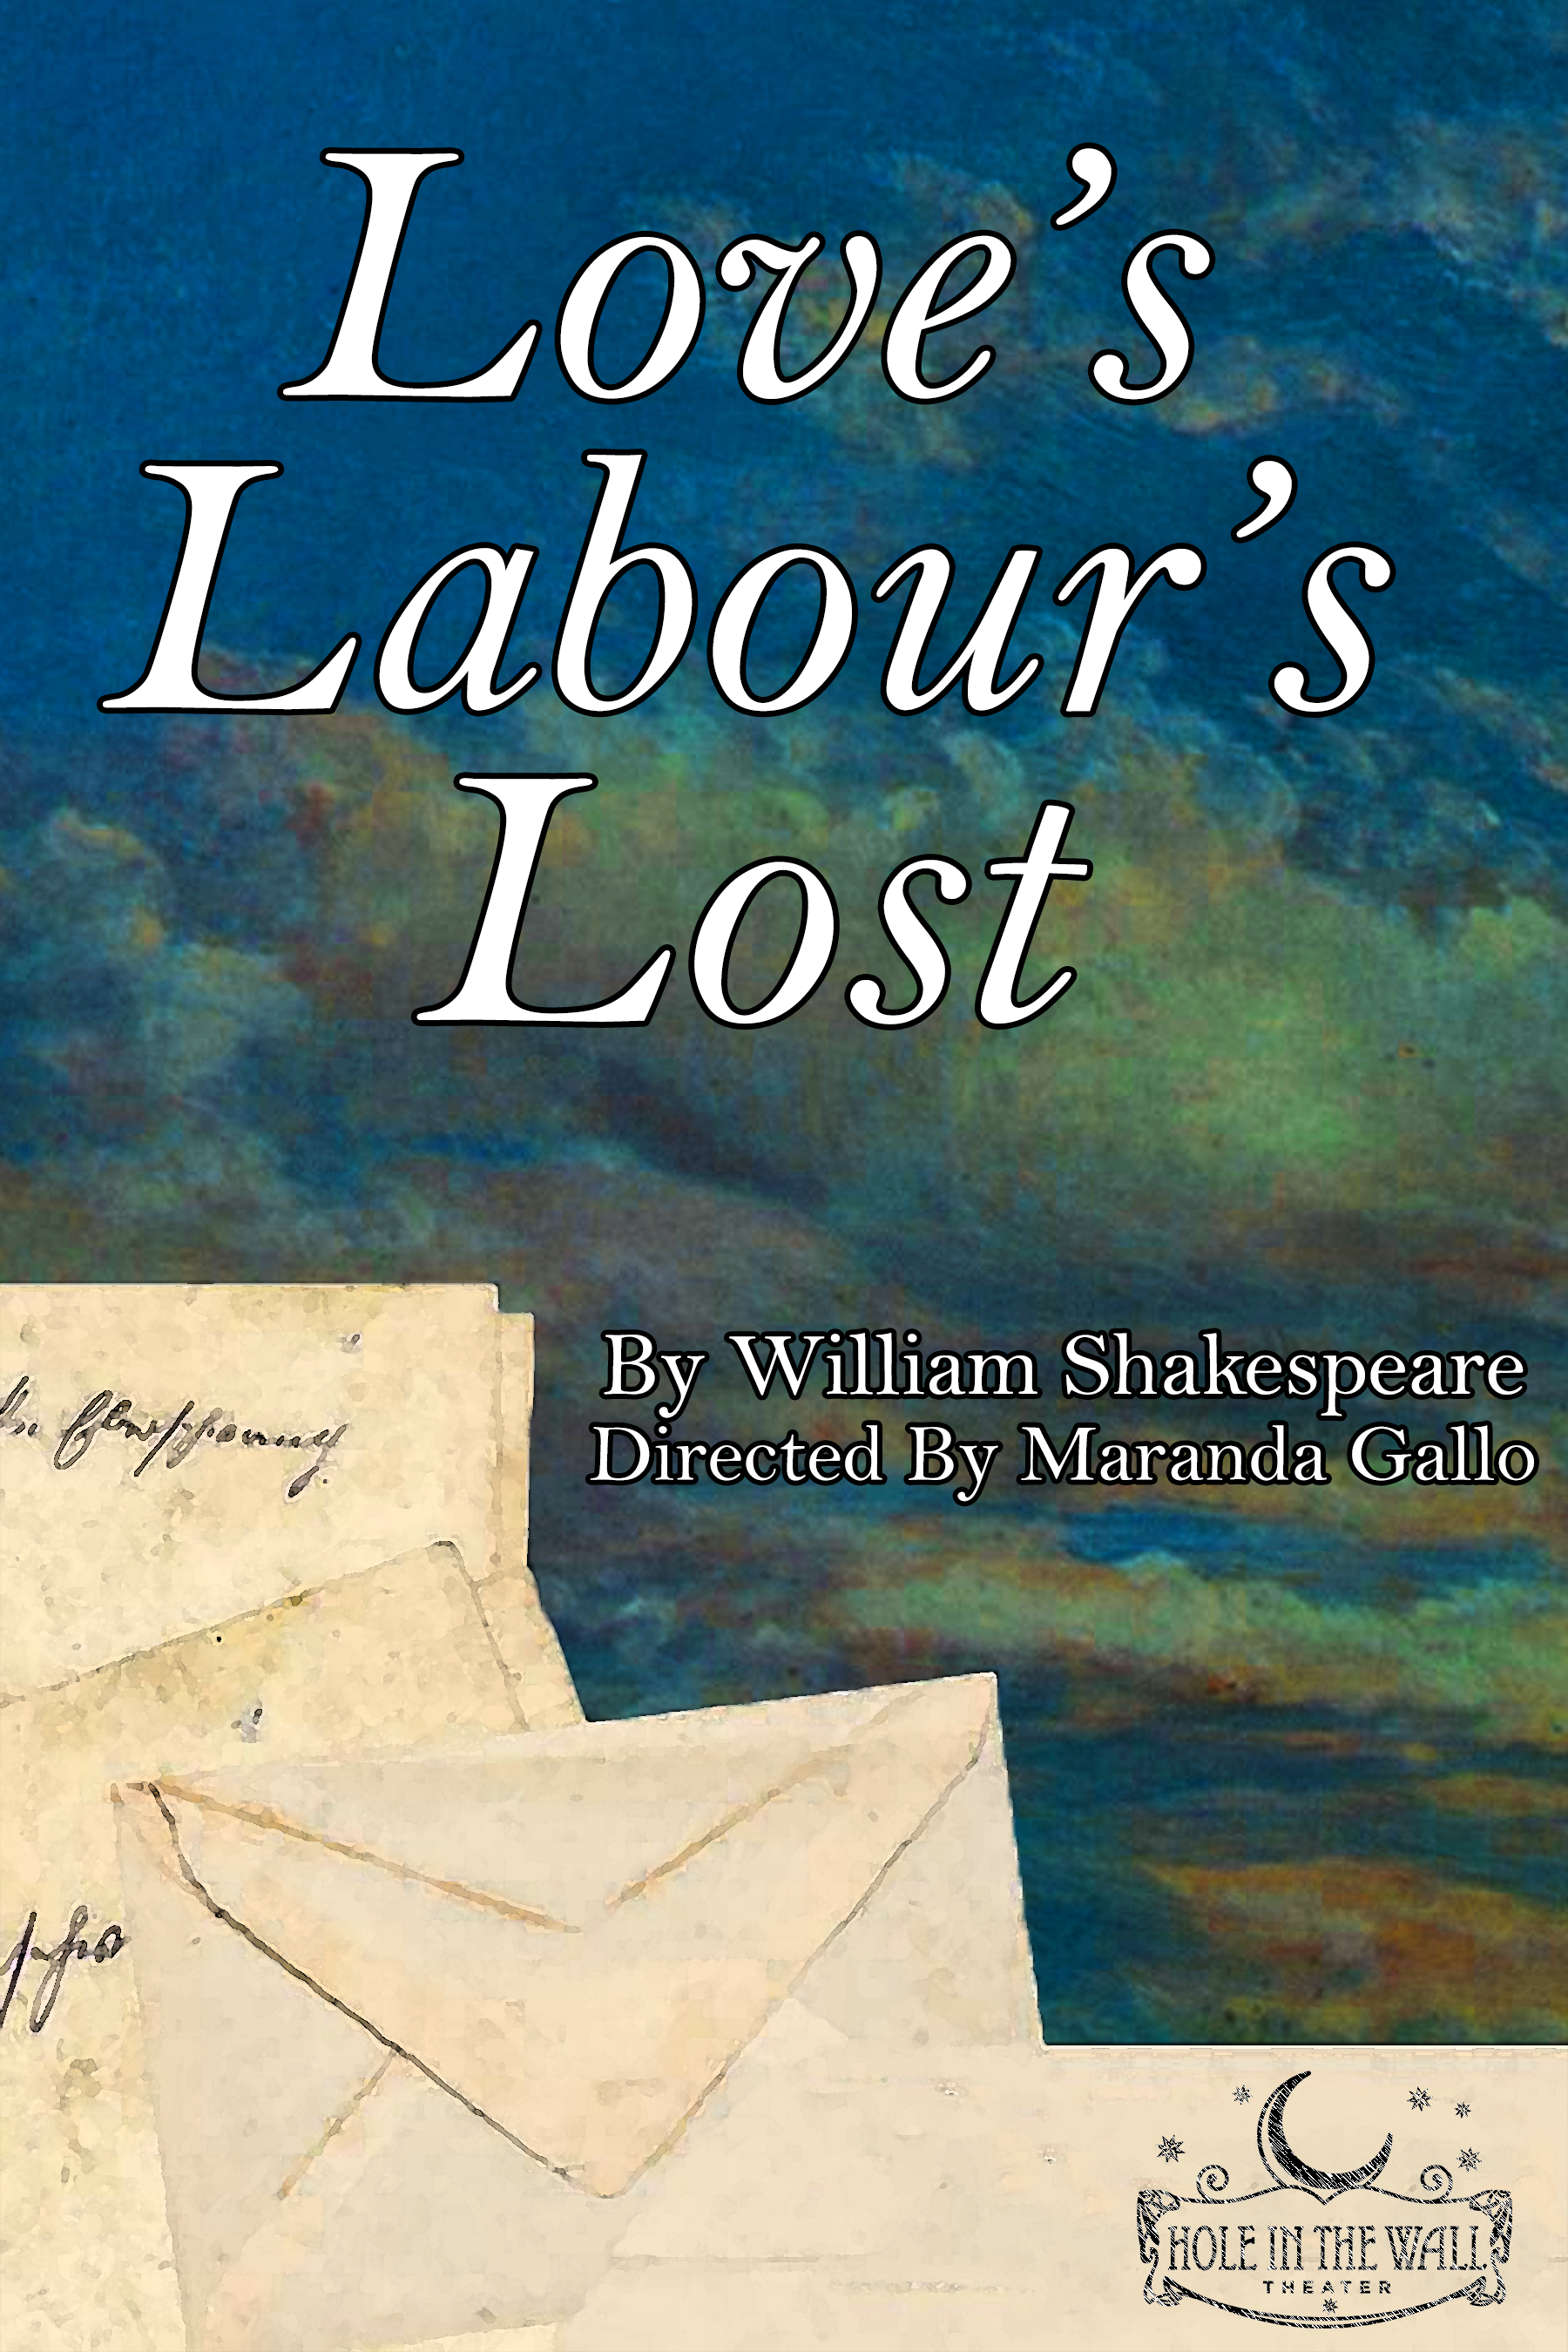 Auditions for Love’s Labours Lost